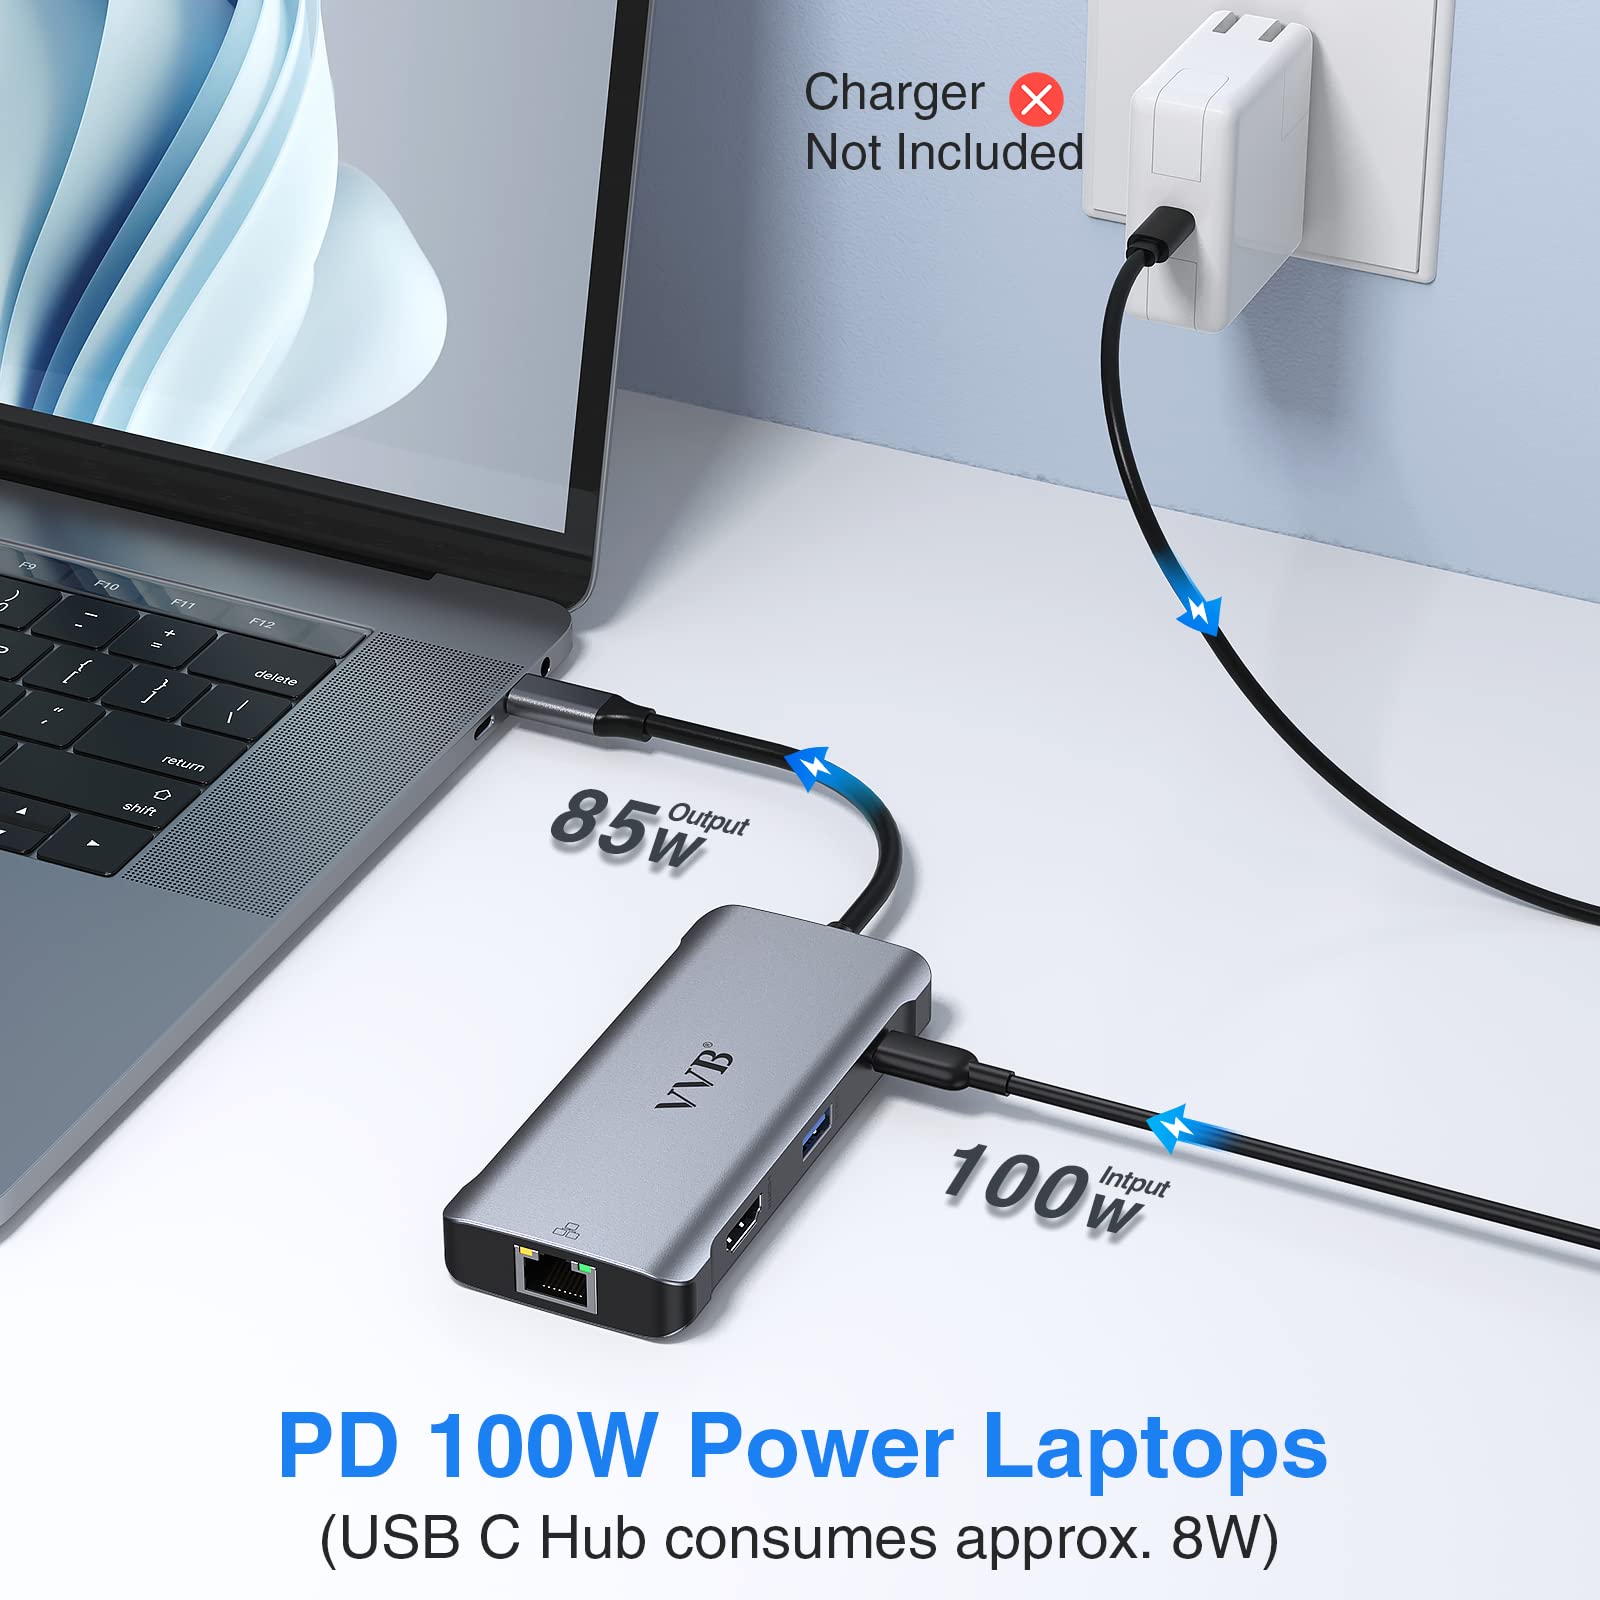 USB C Hub Multiport Adapter, USB Type C Hub to 4K HDMI,Ethernet,100W Power Passthrough,3 USB 3.0 Ports, 6 IN 1 USB-C Hub Dongle for MacBook Pro Air,Surface,Dell,HP Lenovo and More Type C Device